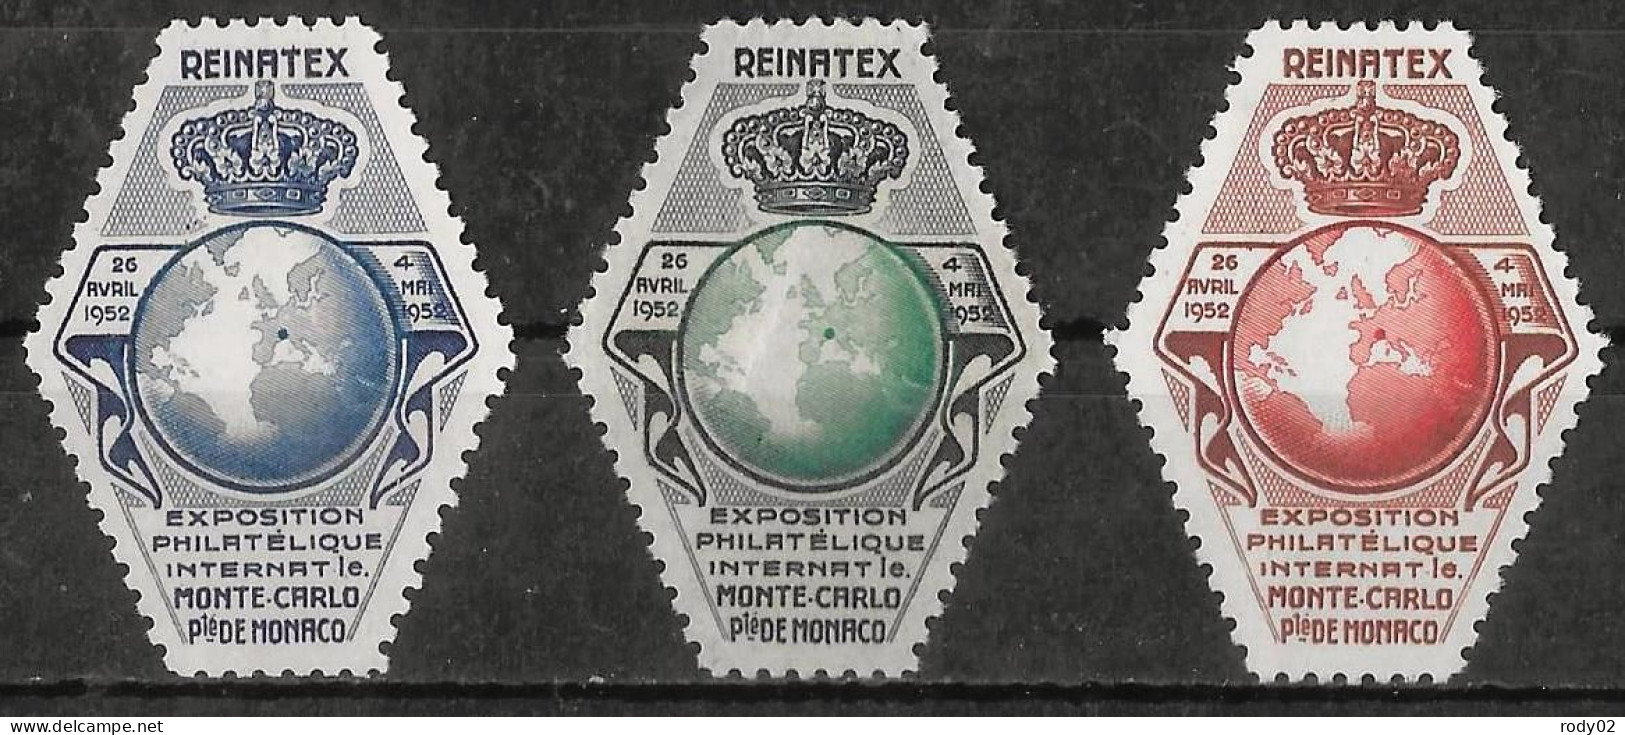 MONACO - 3 VIGNETTES REINATEX - NEUF** MNH - Collections, Lots & Series